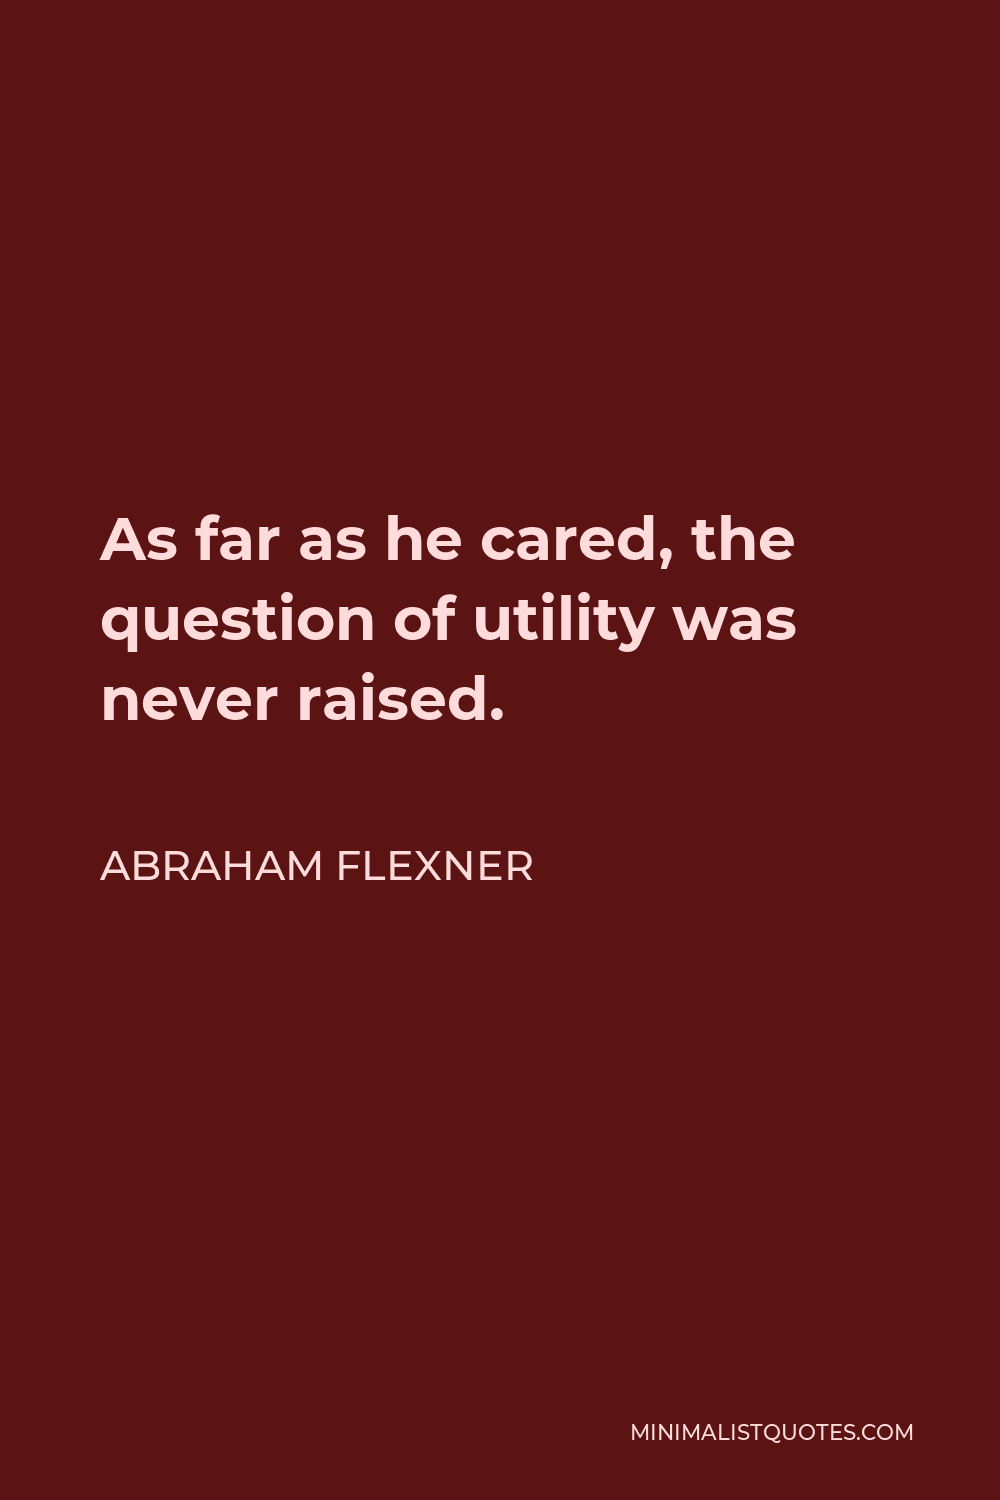 Abraham Flexner Quote - As far as he cared, the question of utility was never raised.